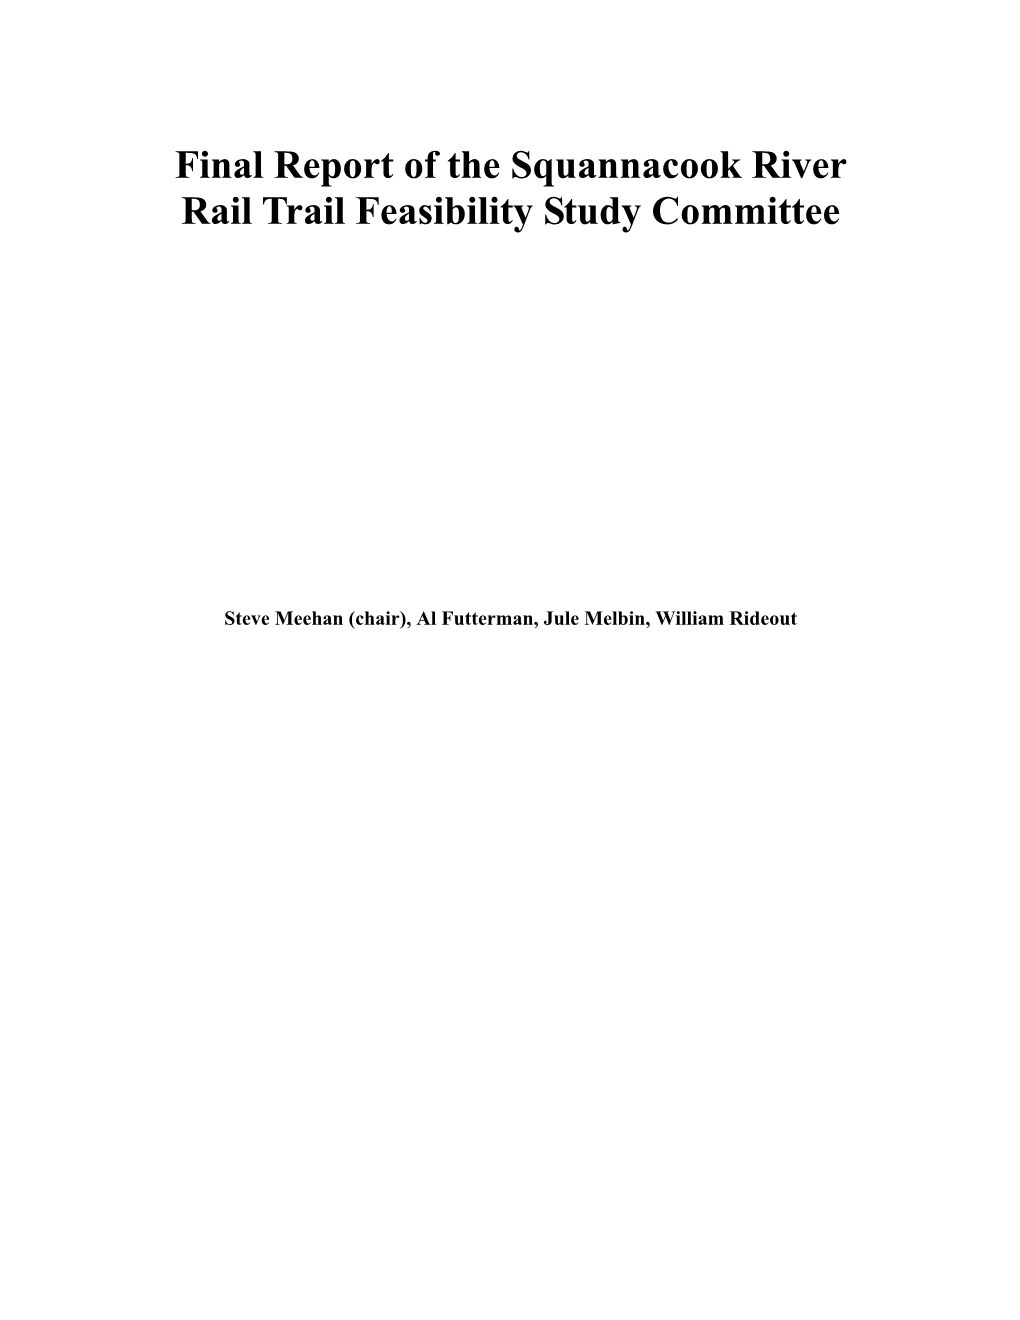 Final Report of the Squannacook River Rail Trail Feasibility Study Committee